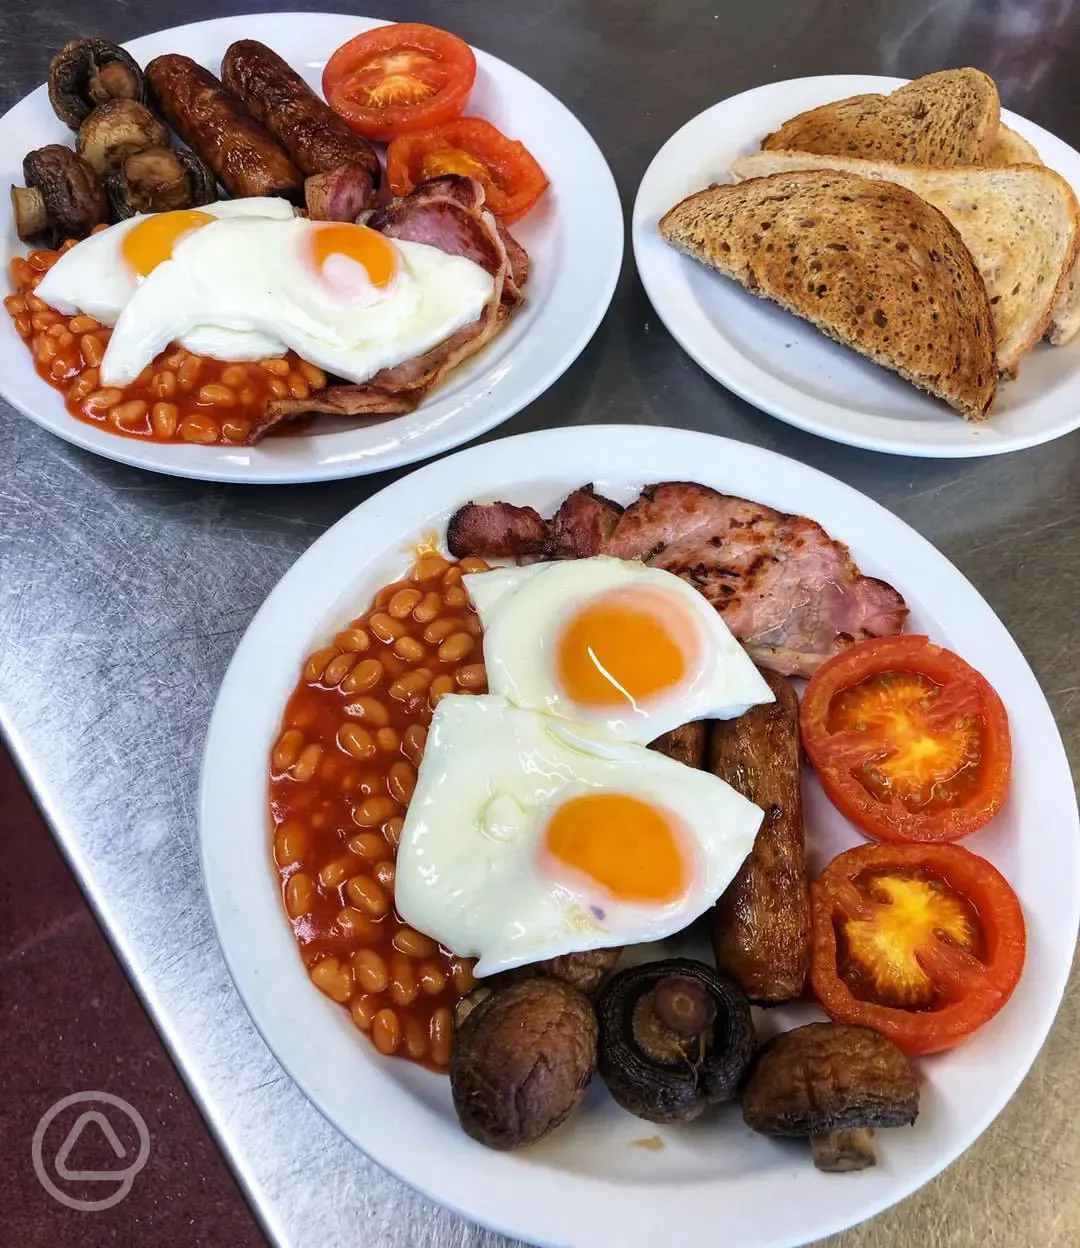 Full English breakfasts available at the pub